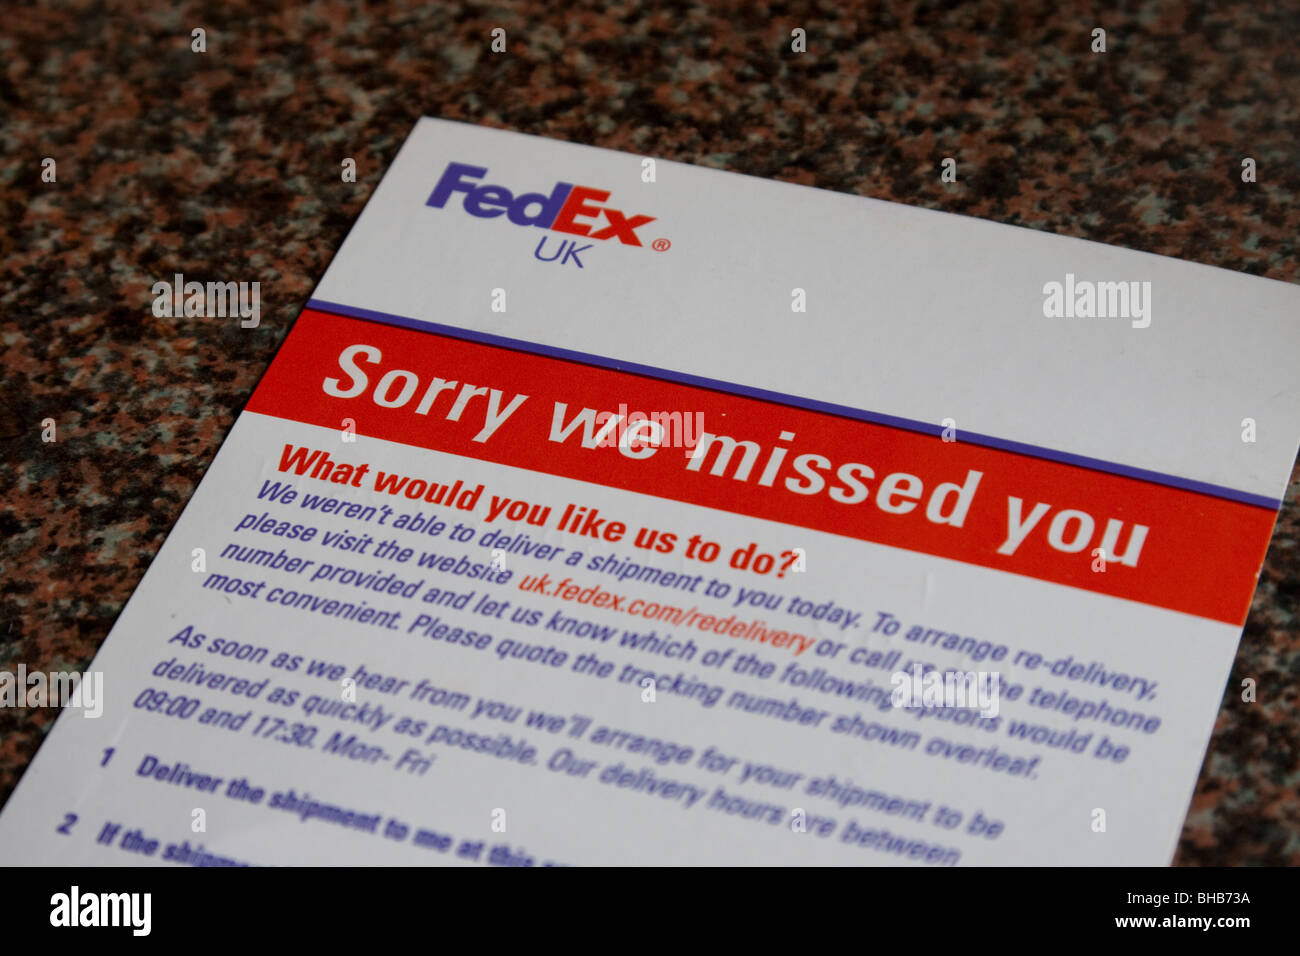 fedex-delivery-notice-left-when-a-parcel